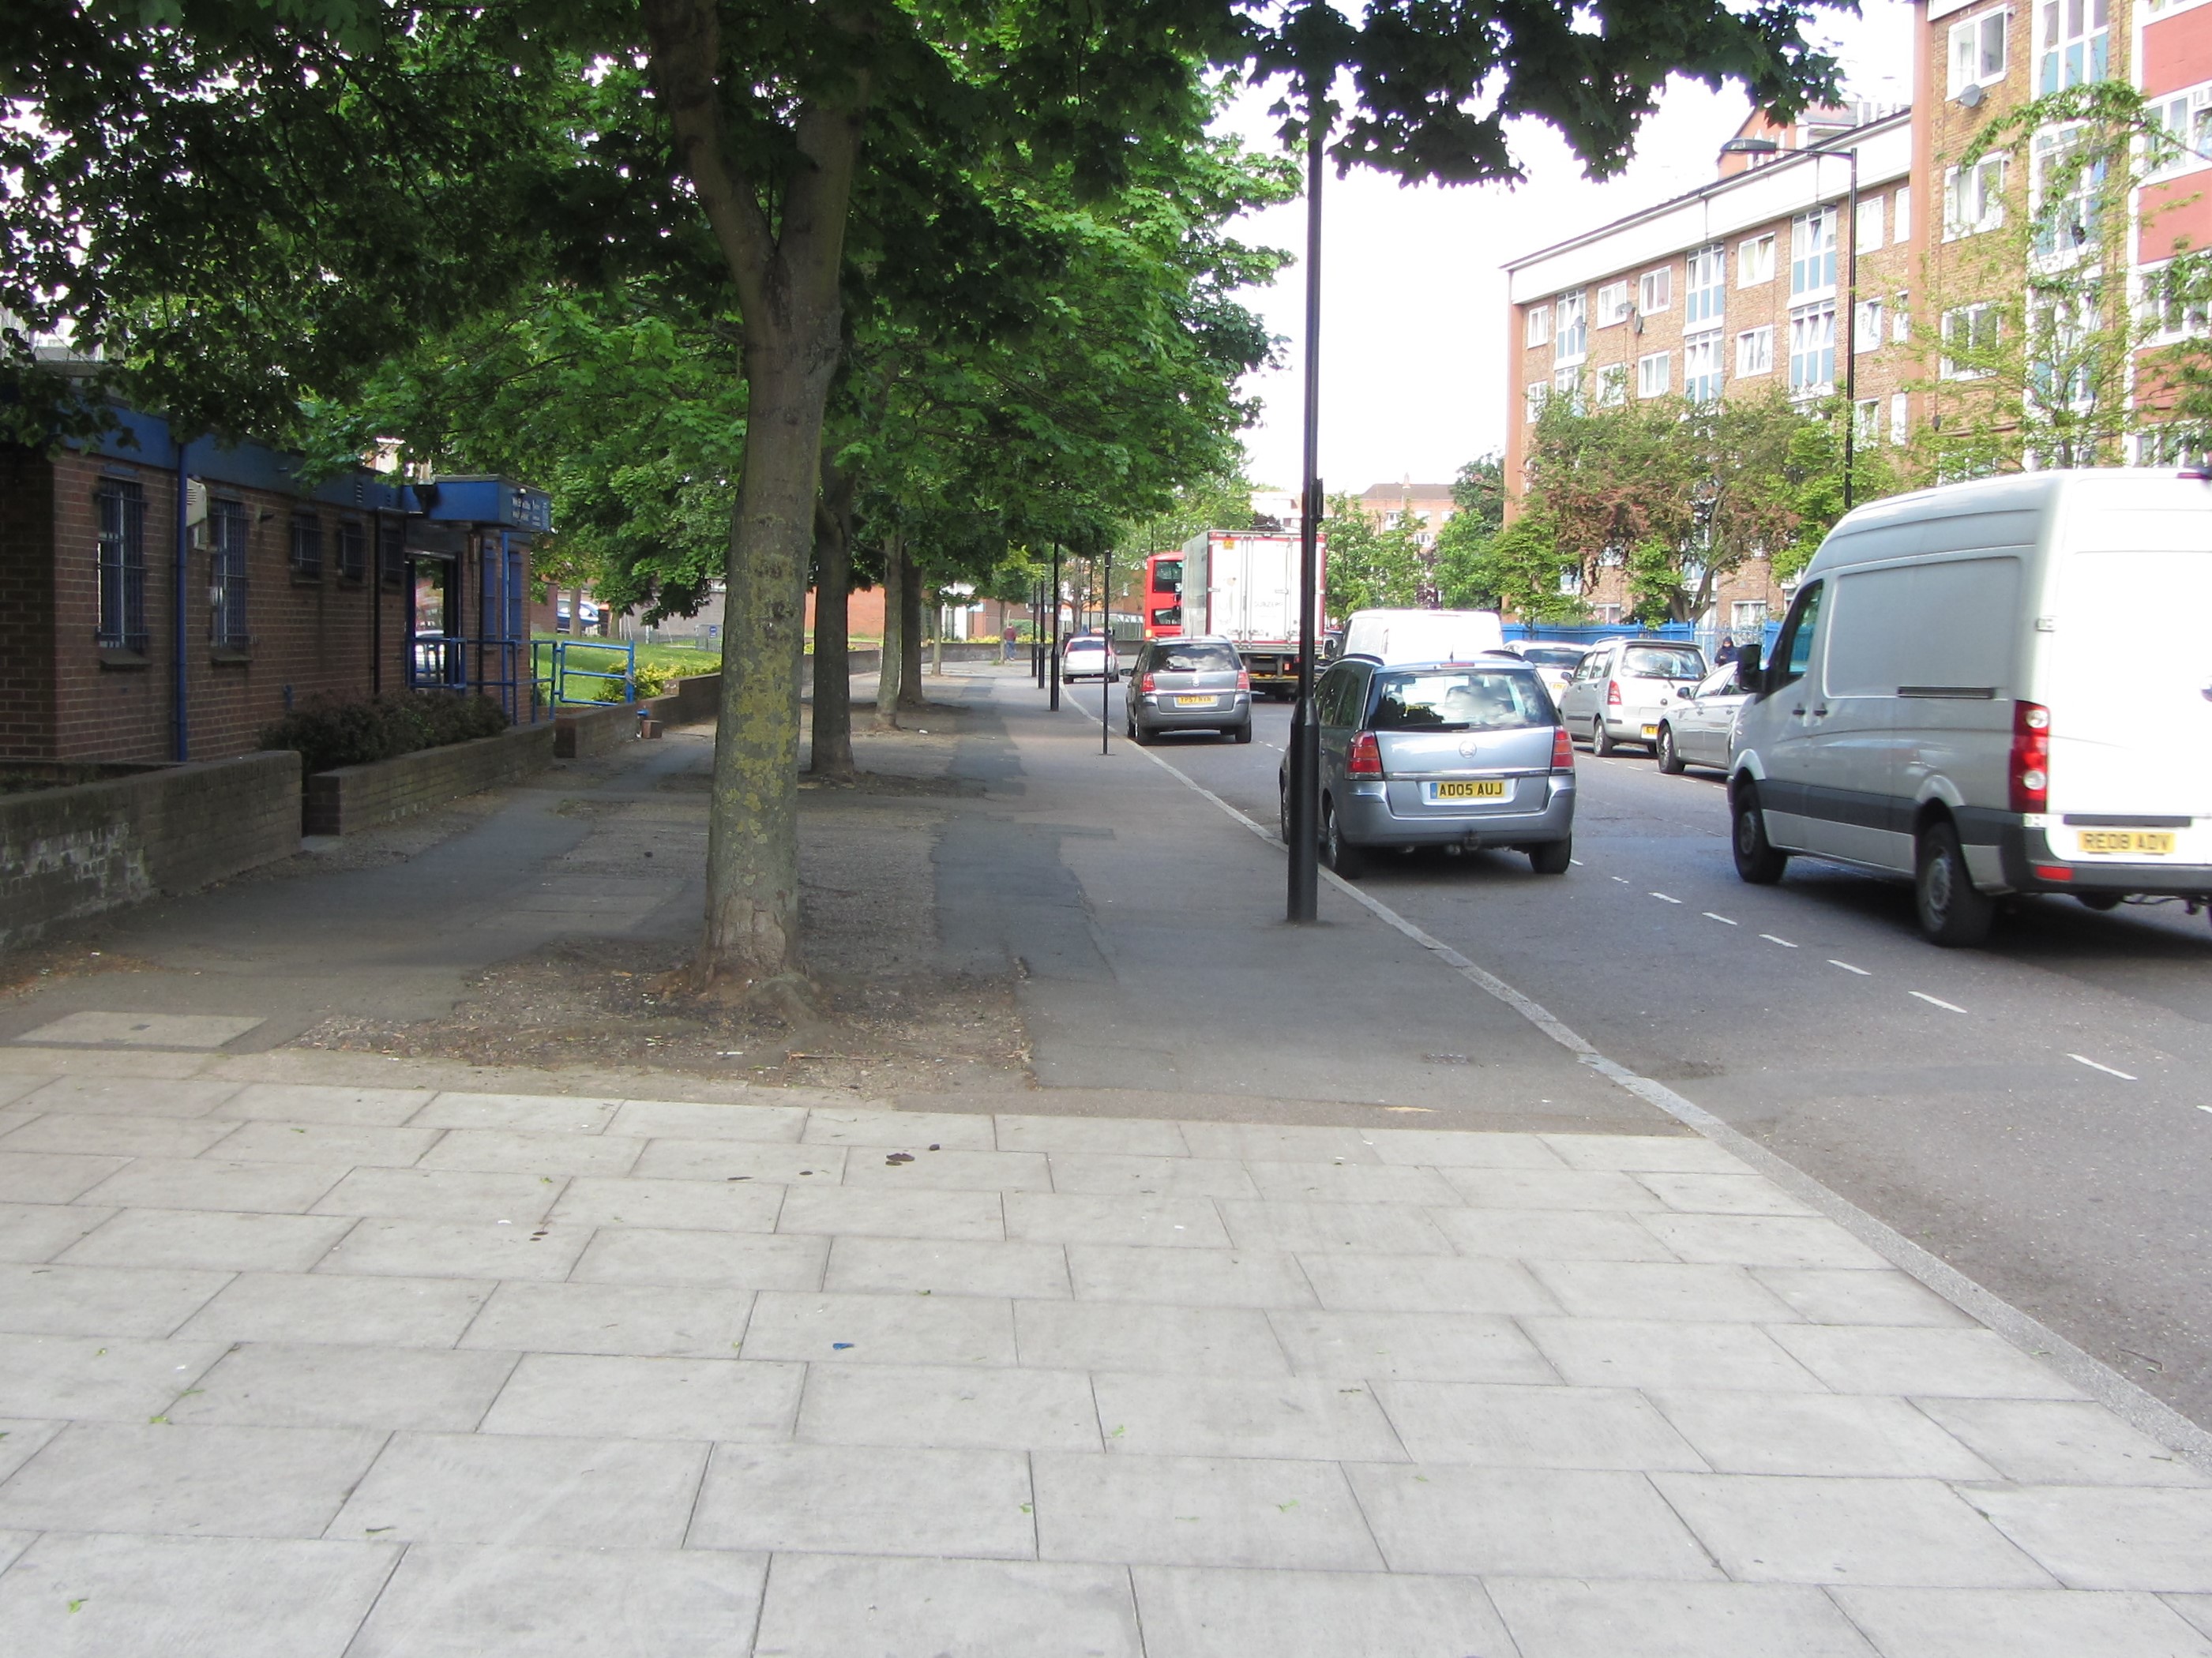 The Westbound footway continues; cycling is illegal here.